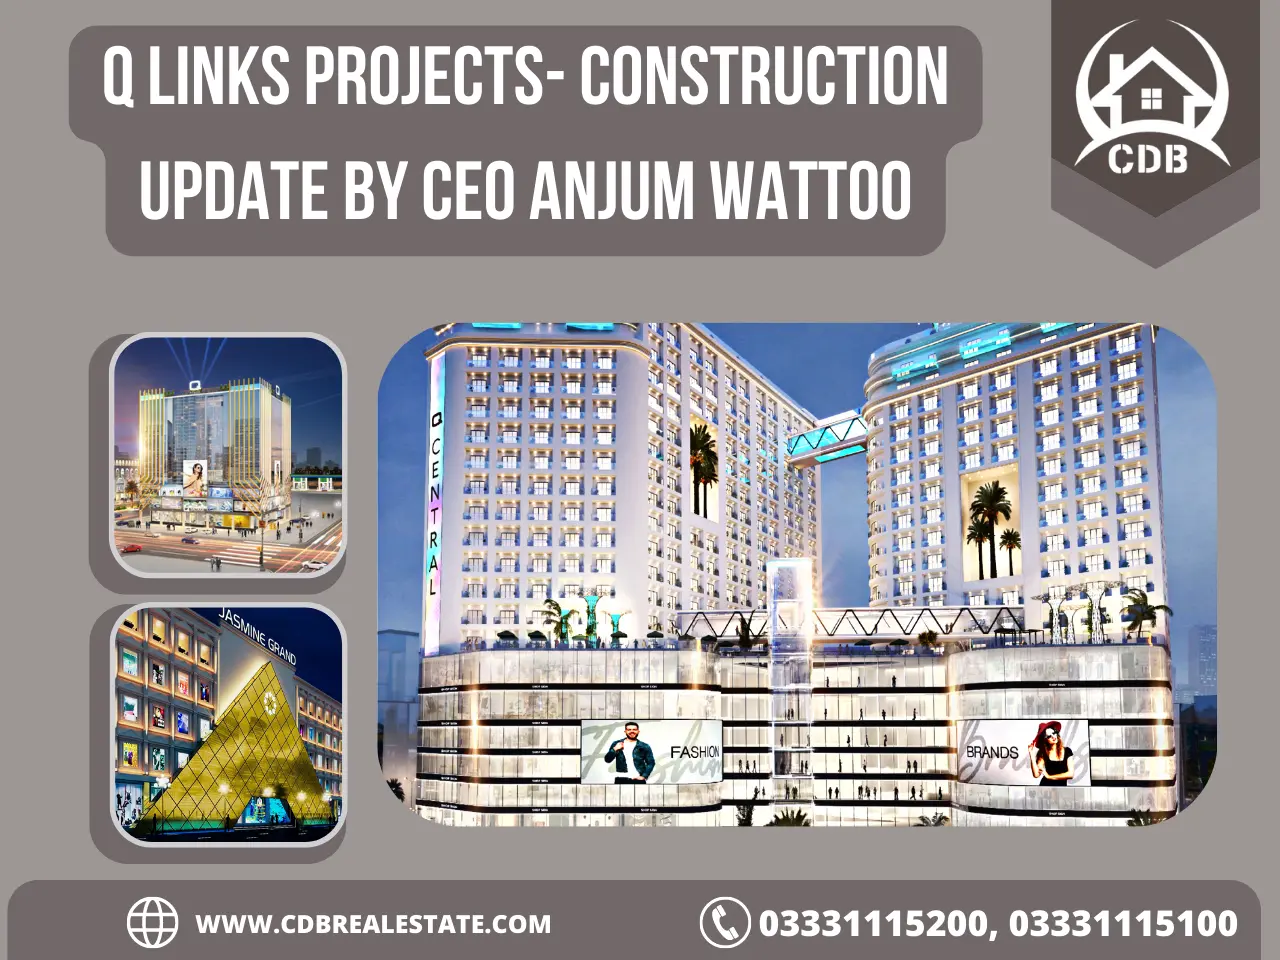 q links project jasmine grand mall q central mall and q bazar